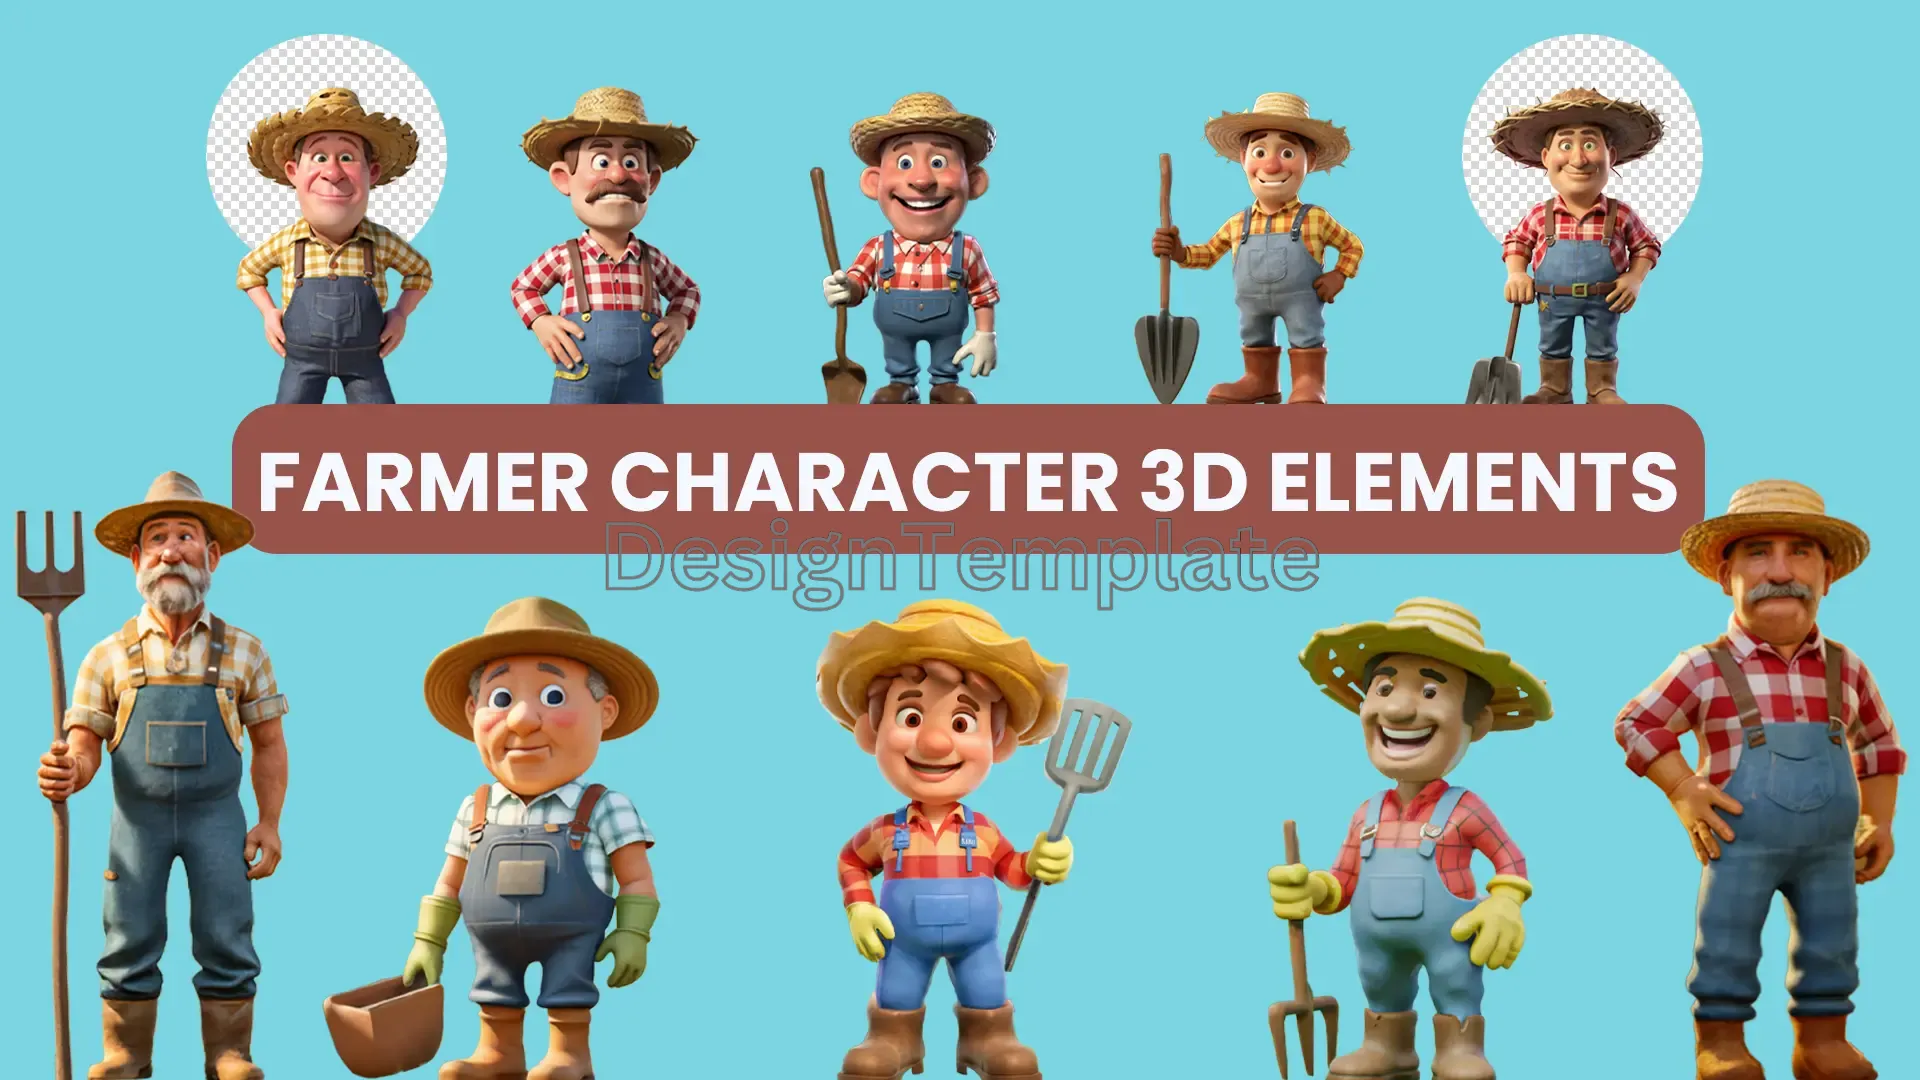 Farm Life Farmer Character 3D Elements Collection